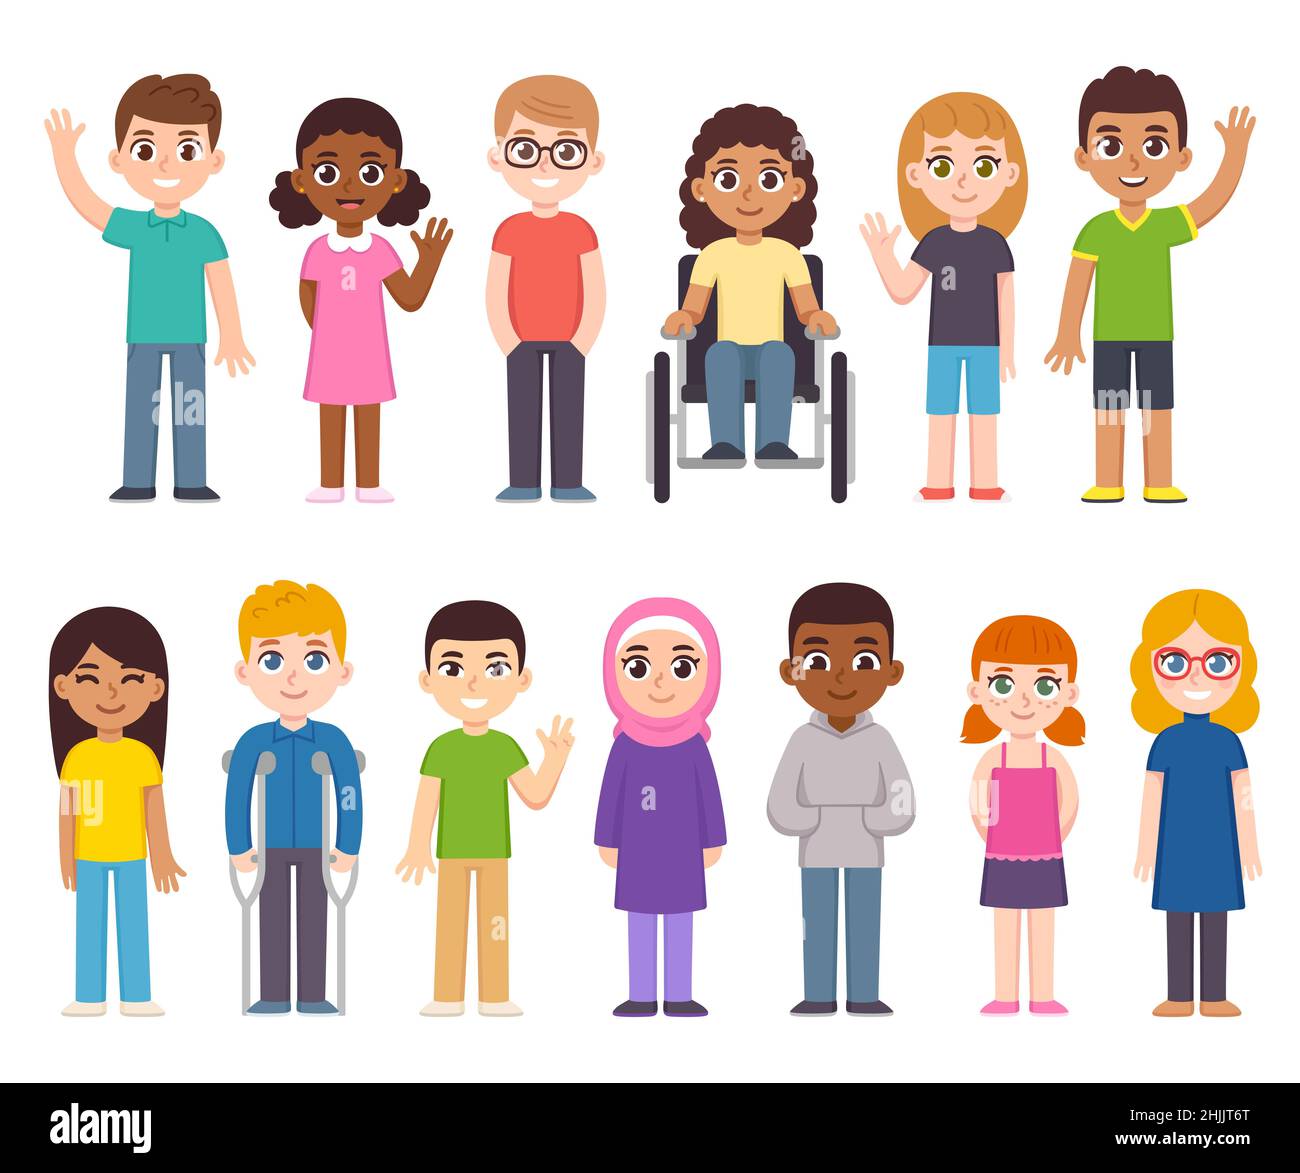 Cute cartoon diverse children group. Kids of different countries and skin color, disabled child inclusion. Vector clip art illustration set. Stock Vector